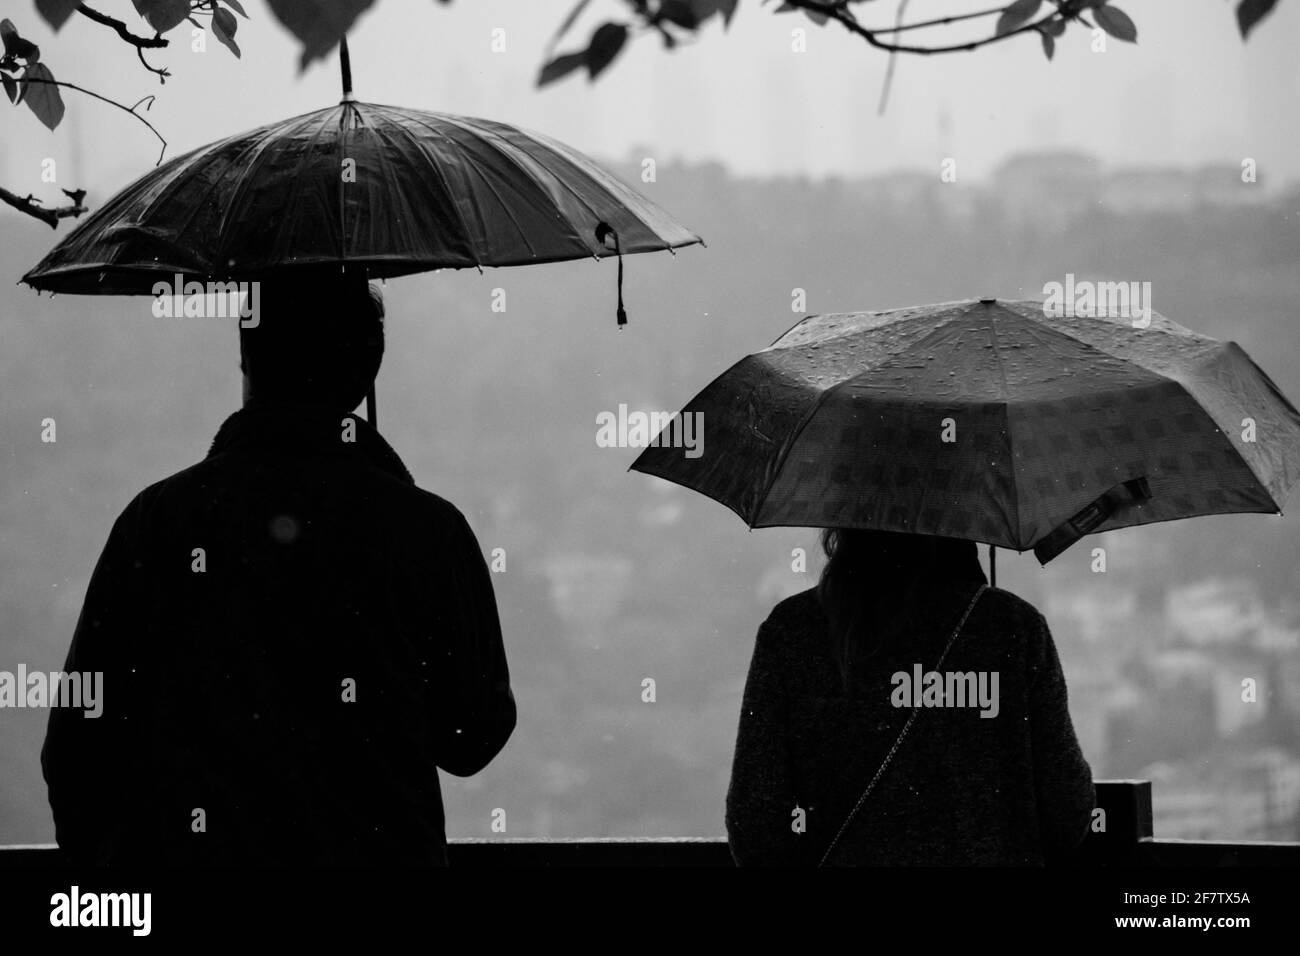 Grayscale shot of a male and female standing with umbrellas during the rain on a foggy day Stock Photo